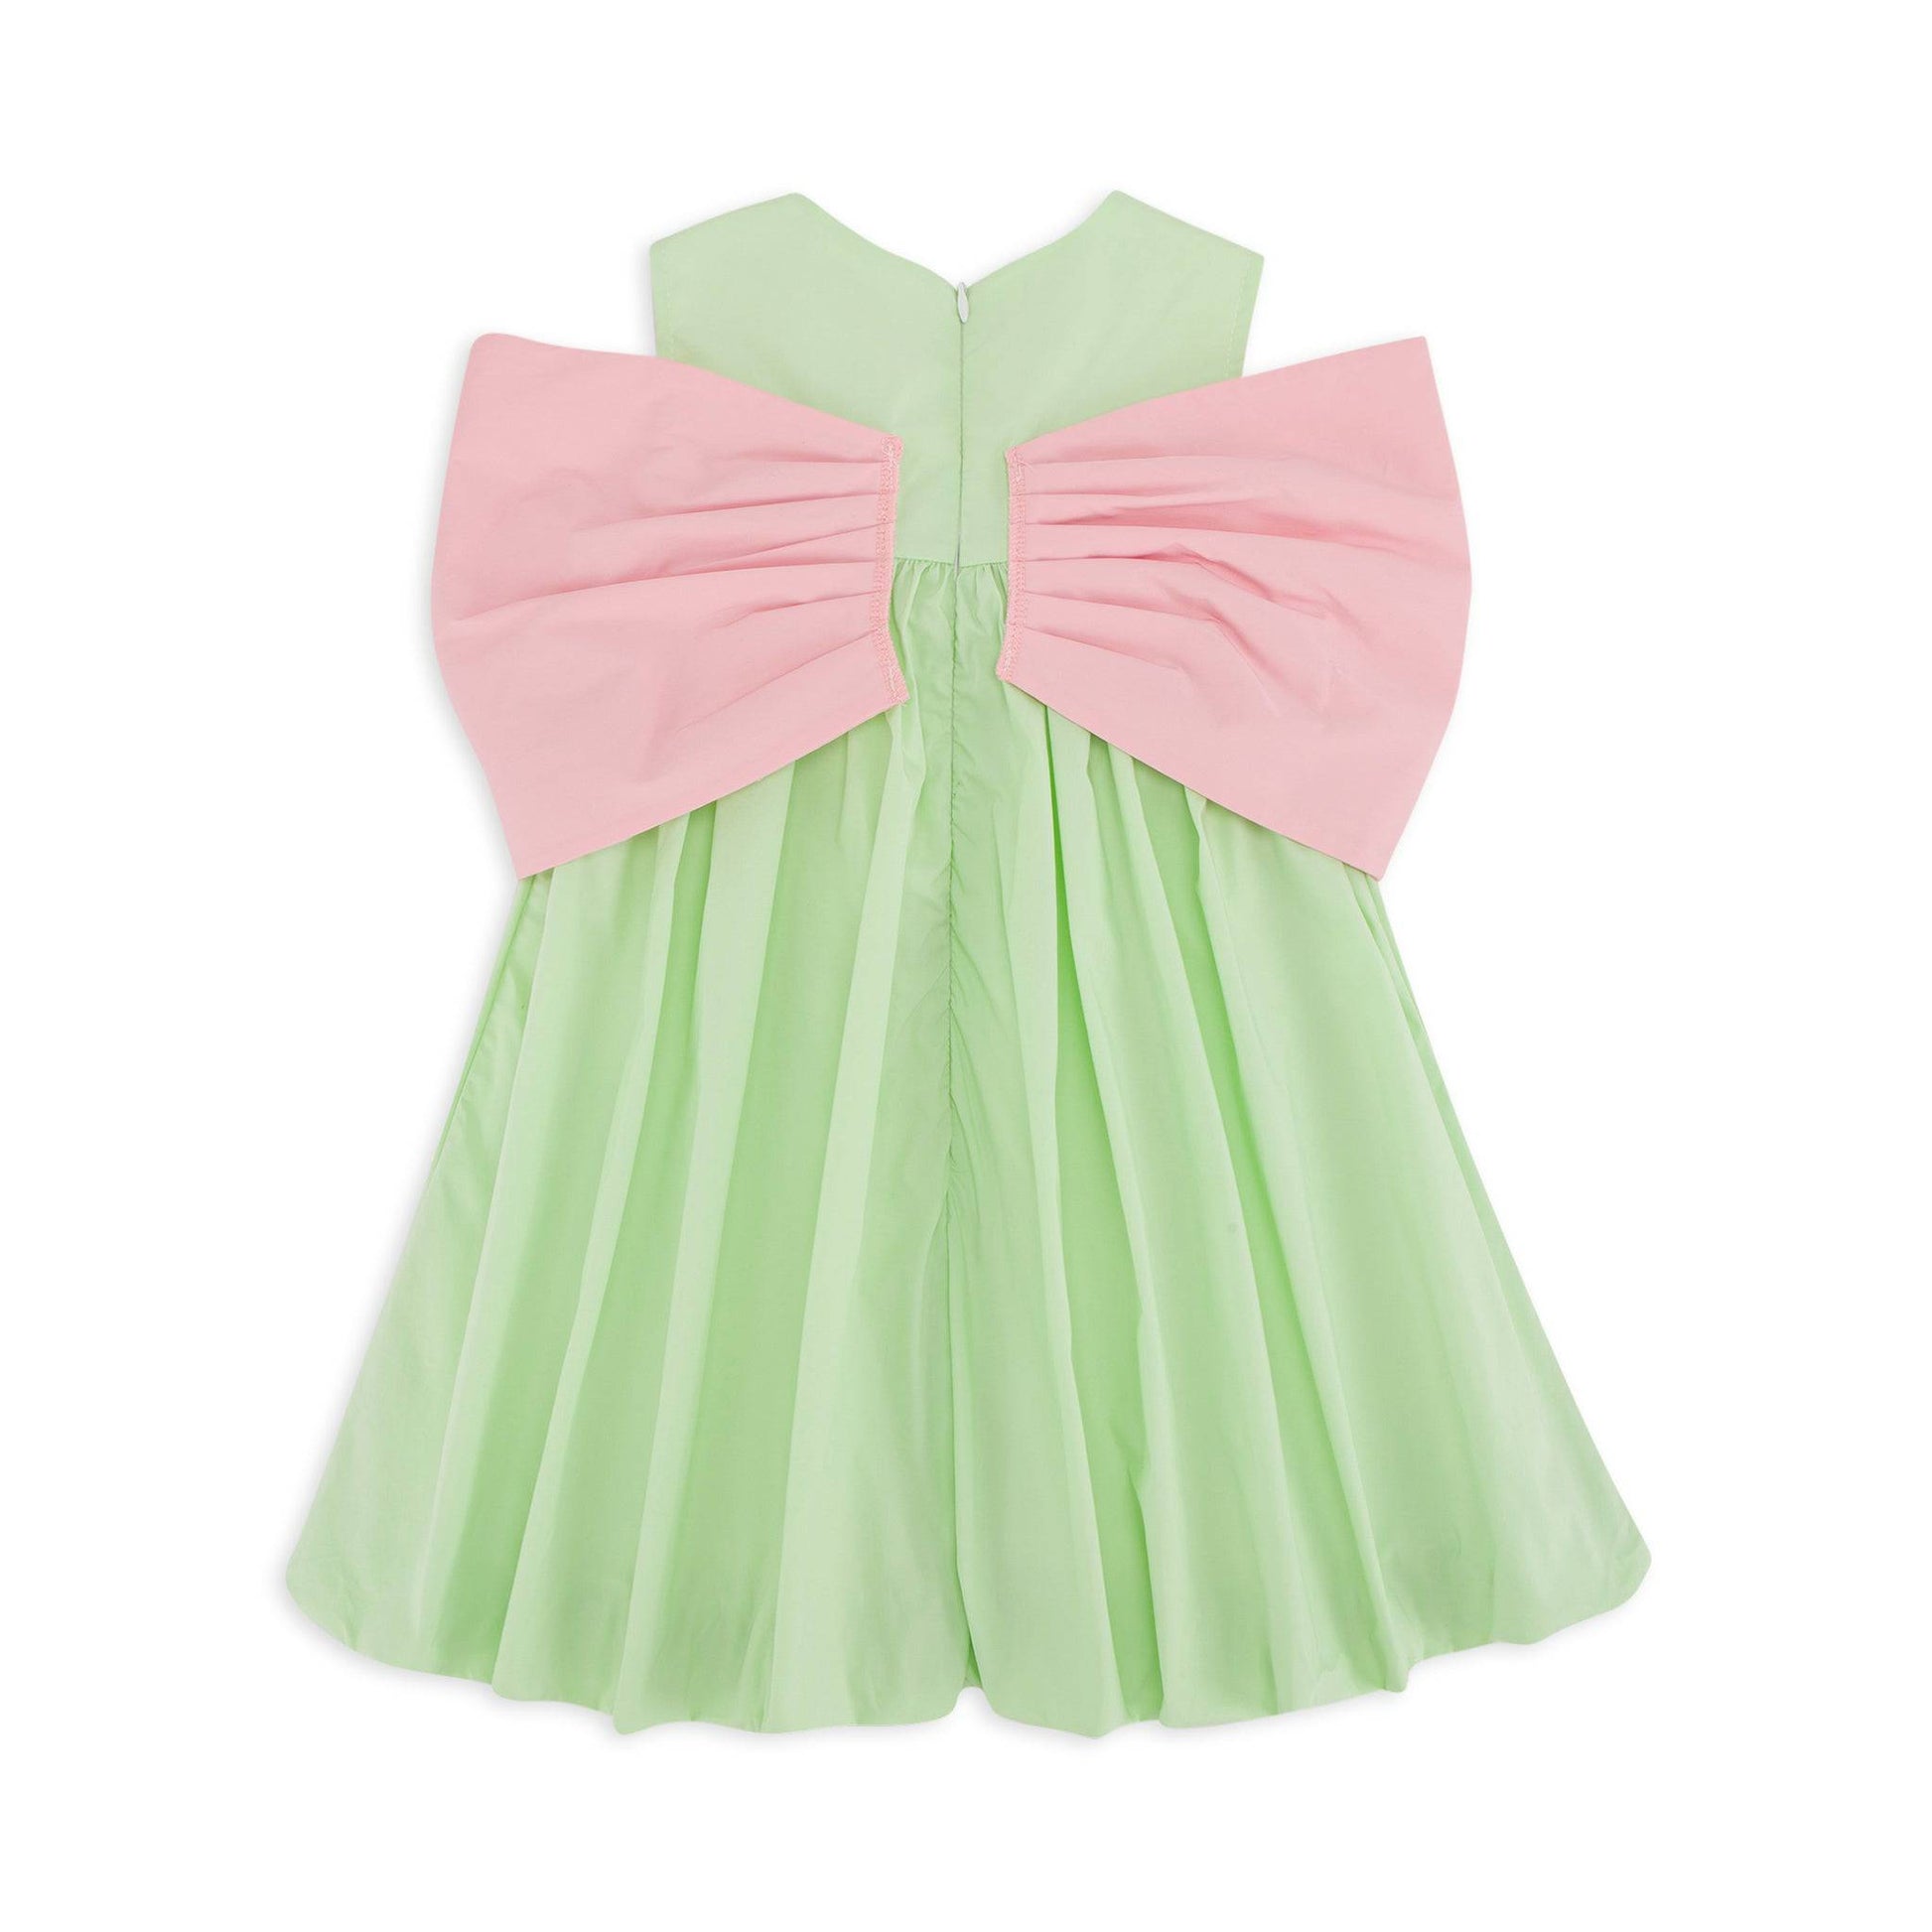 Little Girl's Elegant Fun Dress for Special Occasions